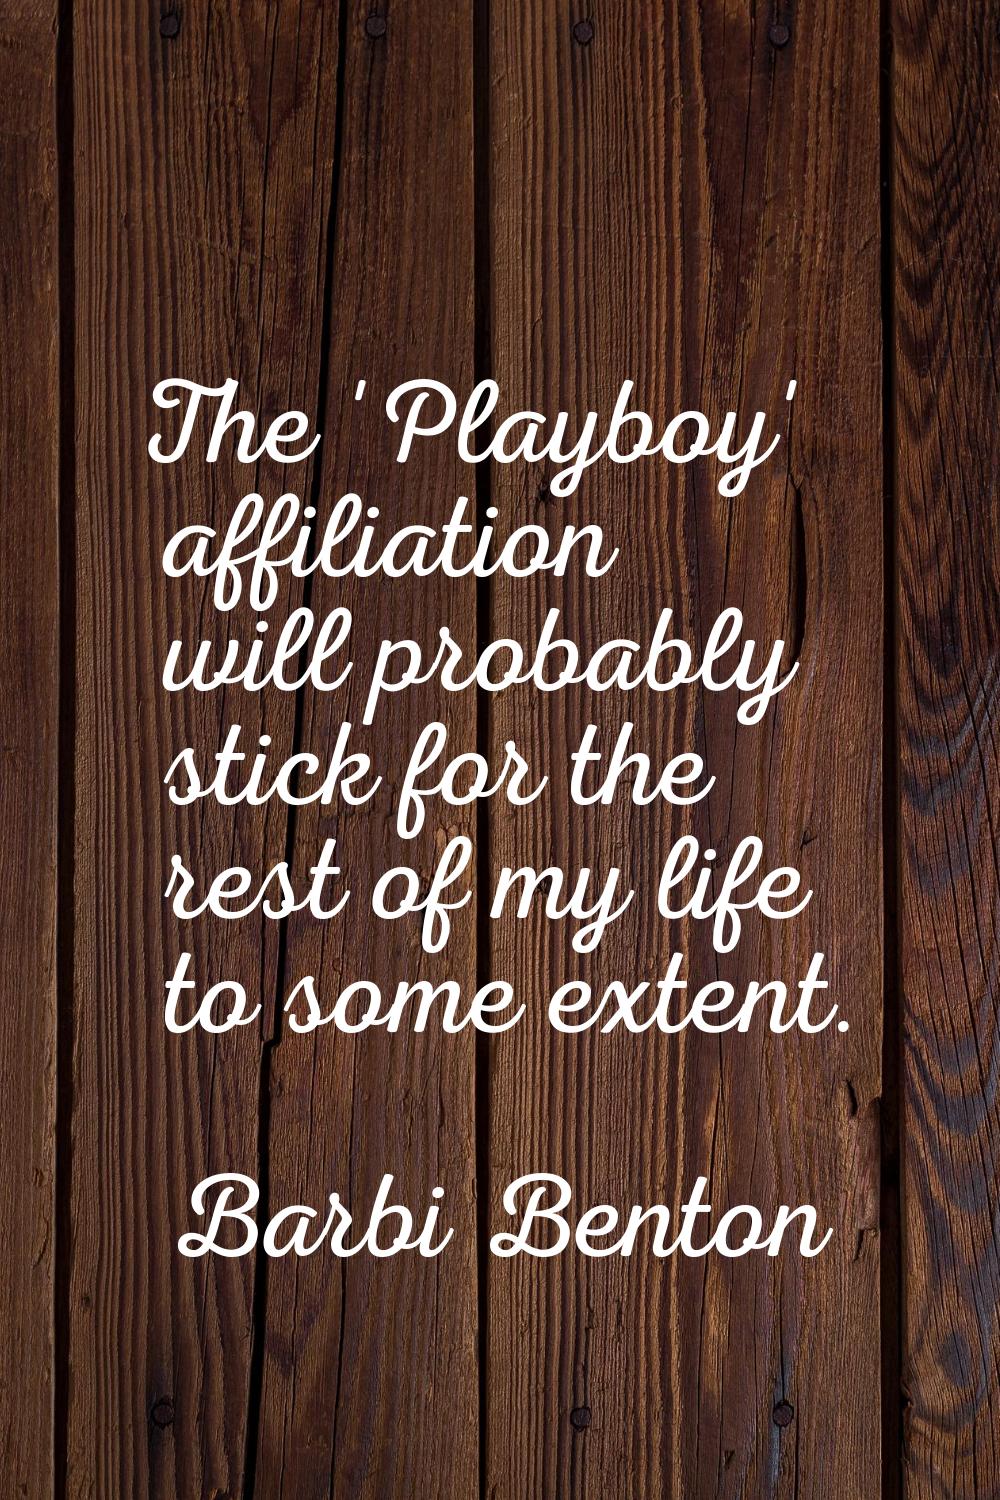 The 'Playboy' affiliation will probably stick for the rest of my life to some extent.